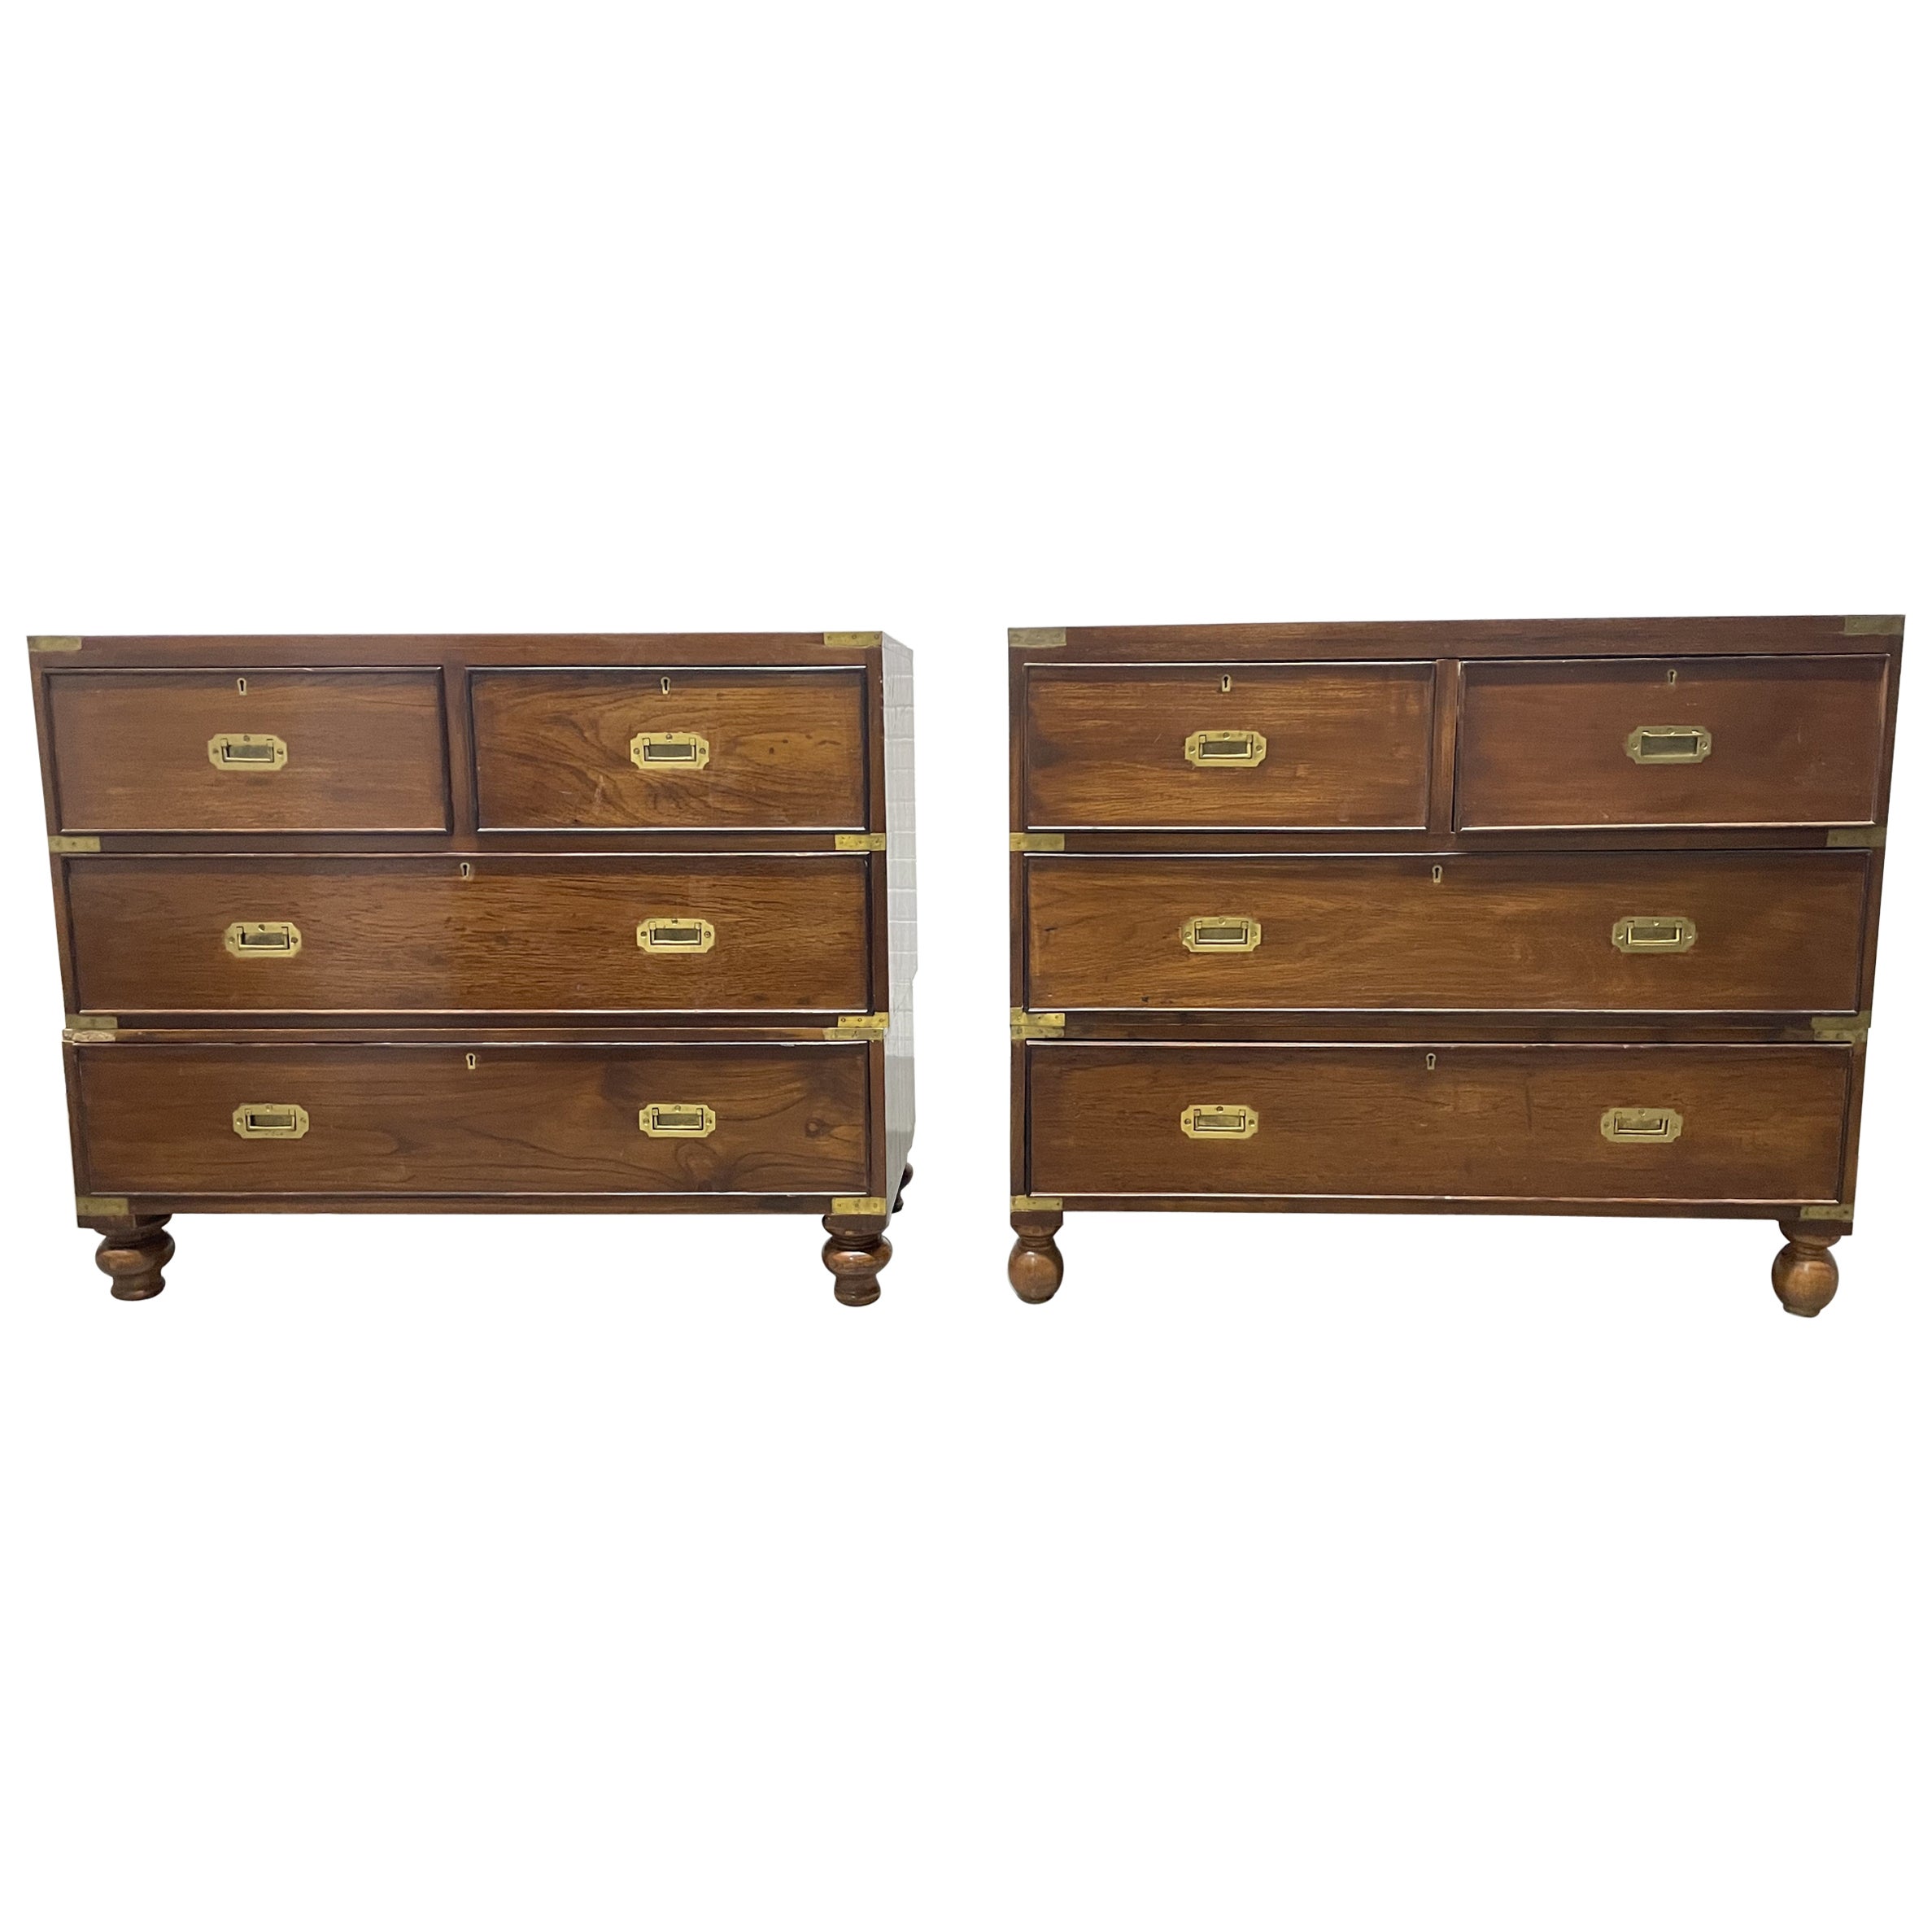 Pair of 19th Century English Mahogany Campaign Chests For Sale